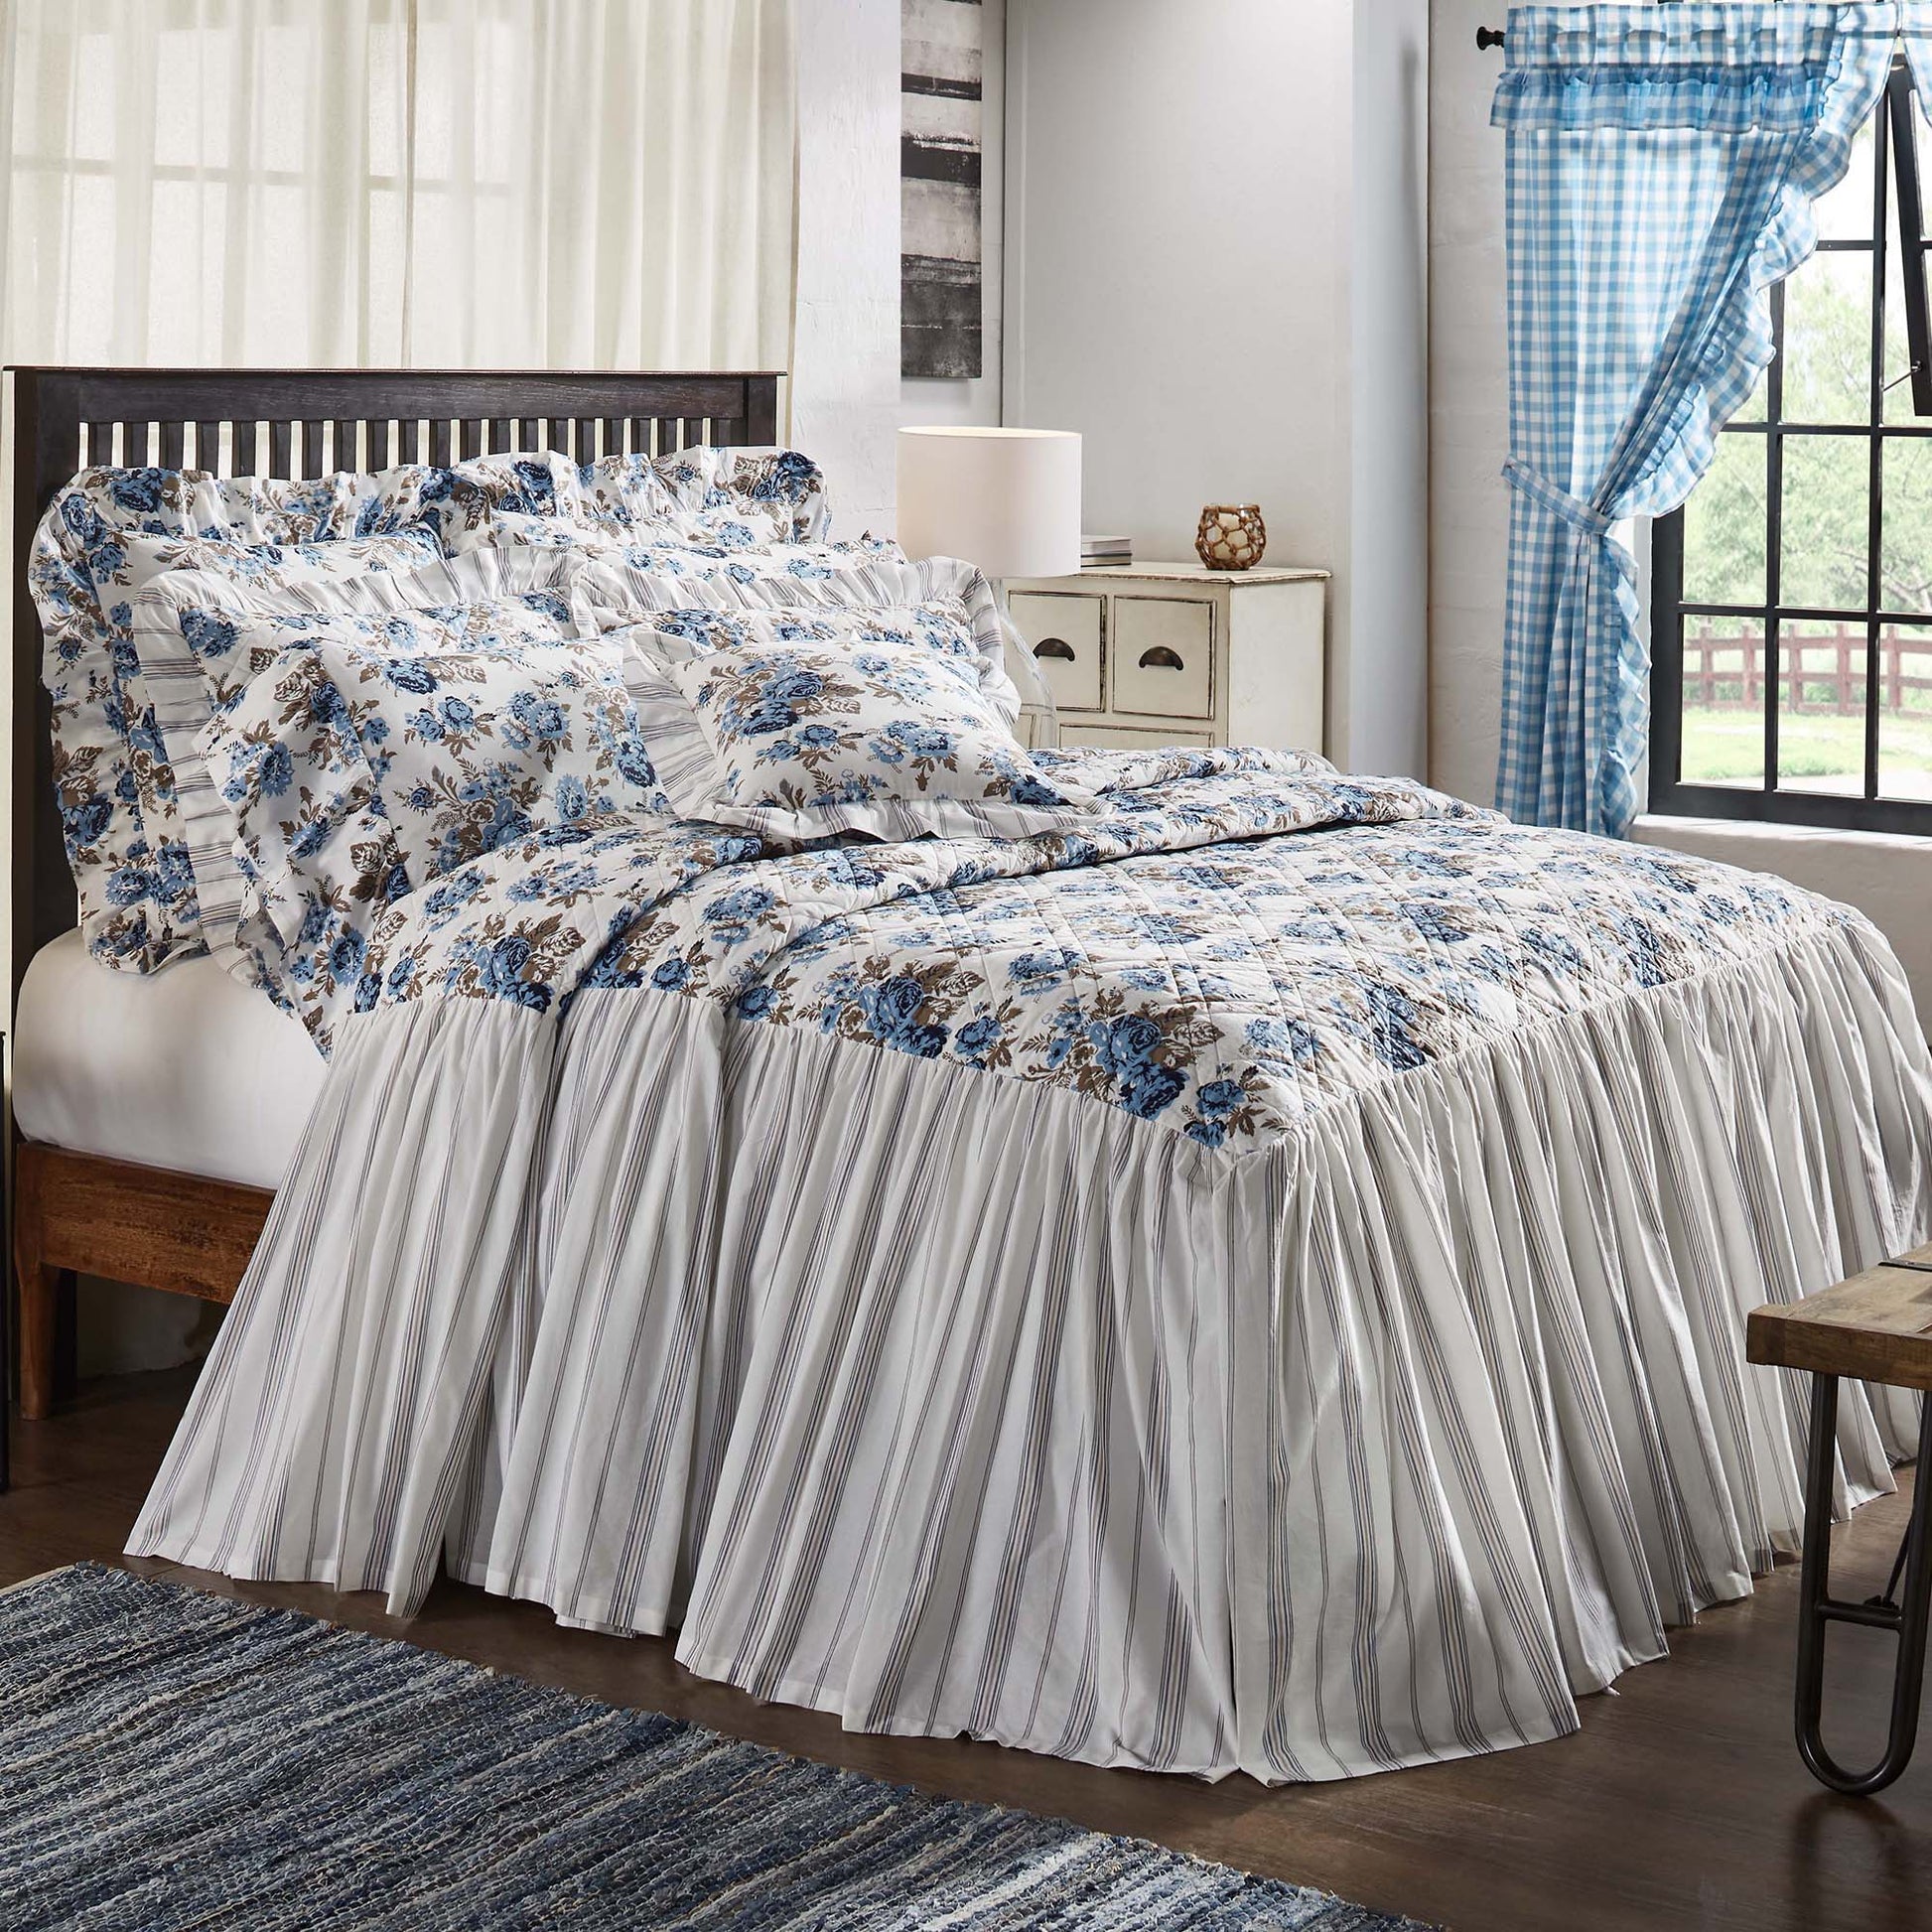 69994-Annie-Blue-Floral-Ruffled-King-Coverlet-80x76-27-image-4